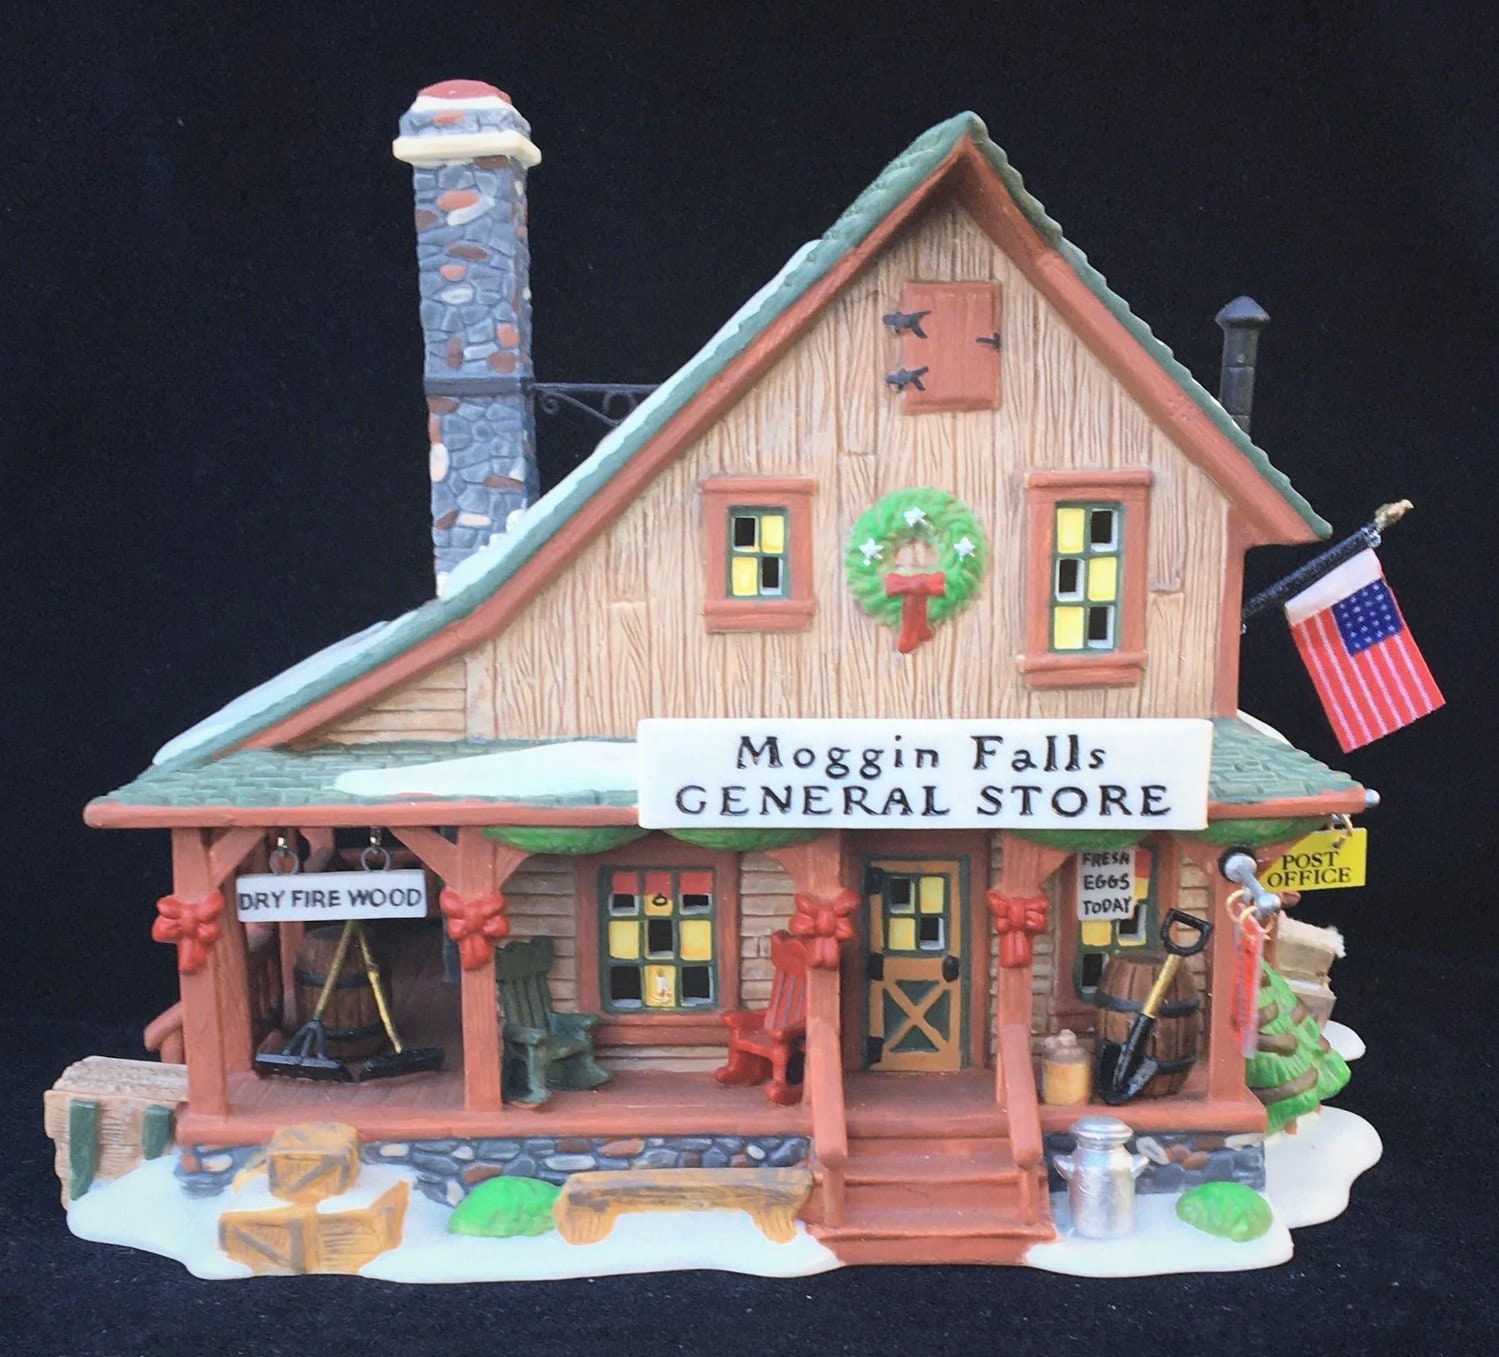 Department 56 New England Village Series Moggin Falls General Store  #56602 Hand-Painted Porcelain in Excellent Condition in Original Box